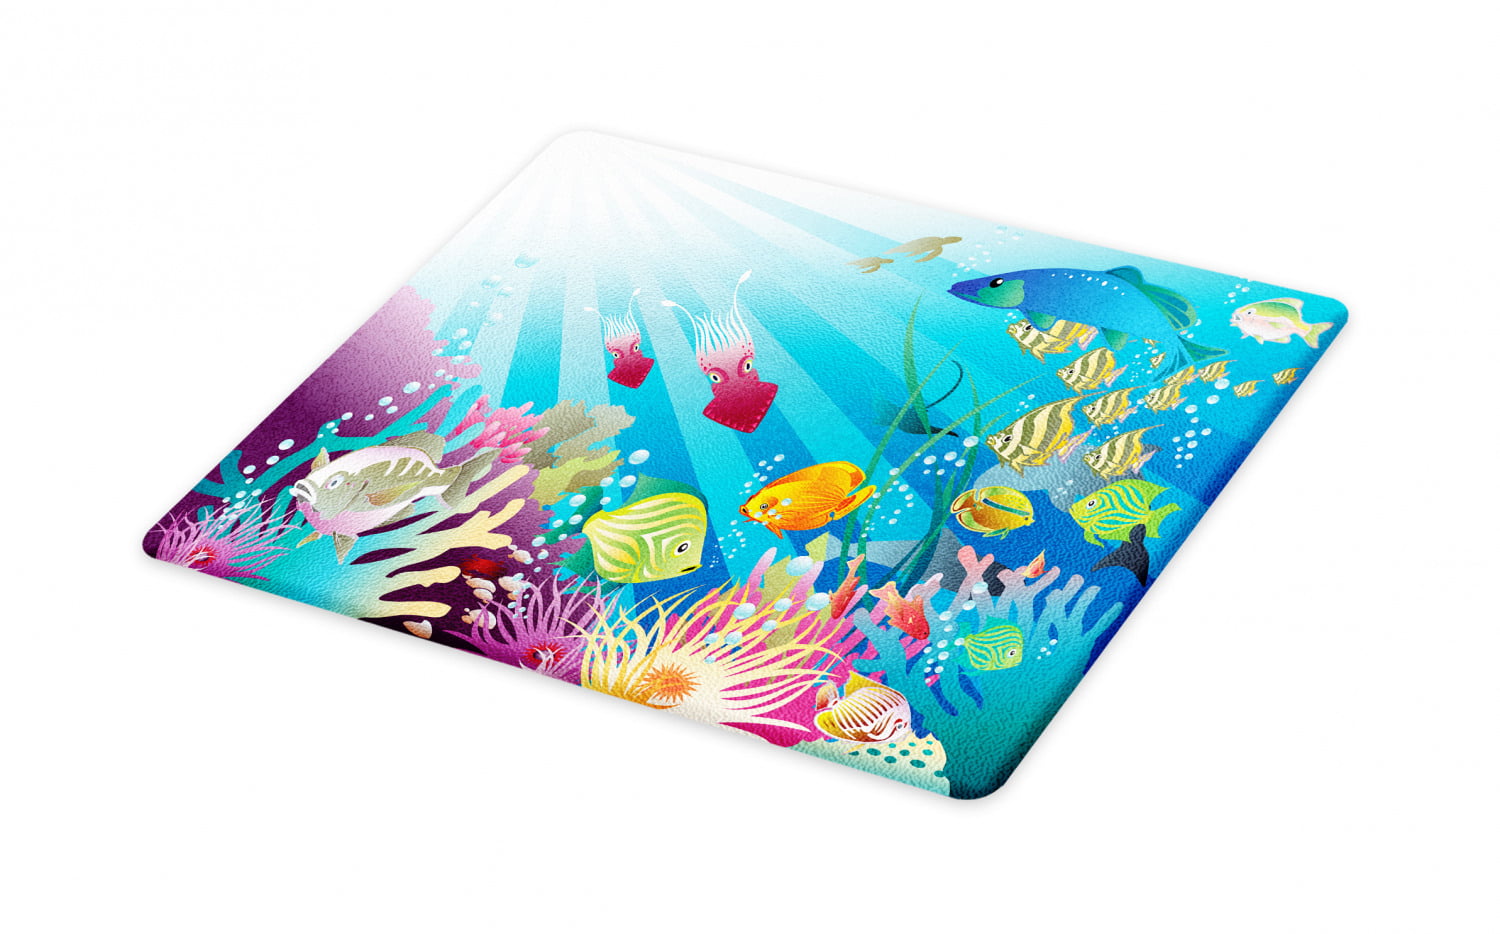 Underwater Cutting Board, Print of Colorful Marine Themed